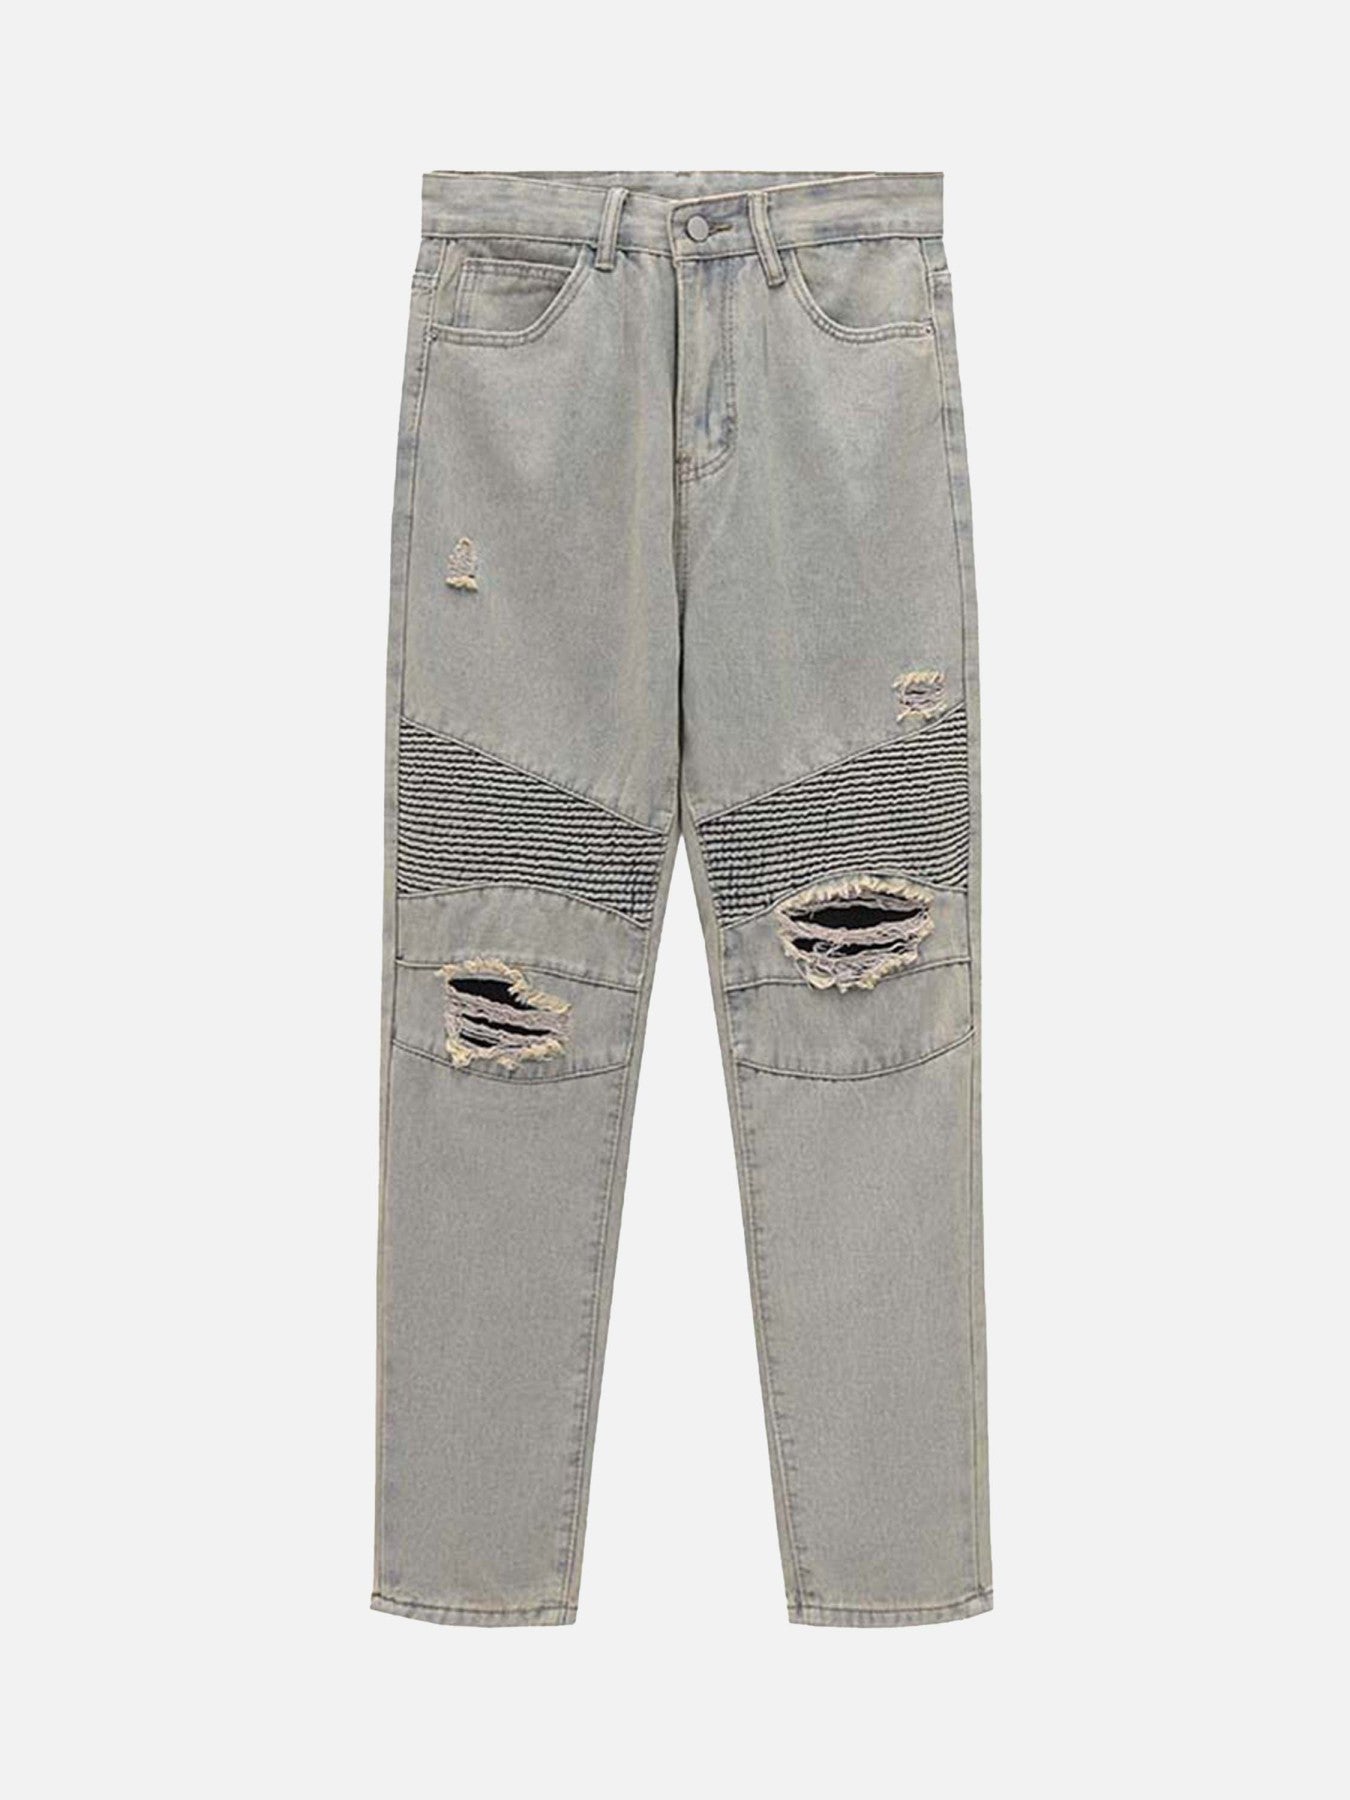 Thesupermade American High Street Skinny Jeans